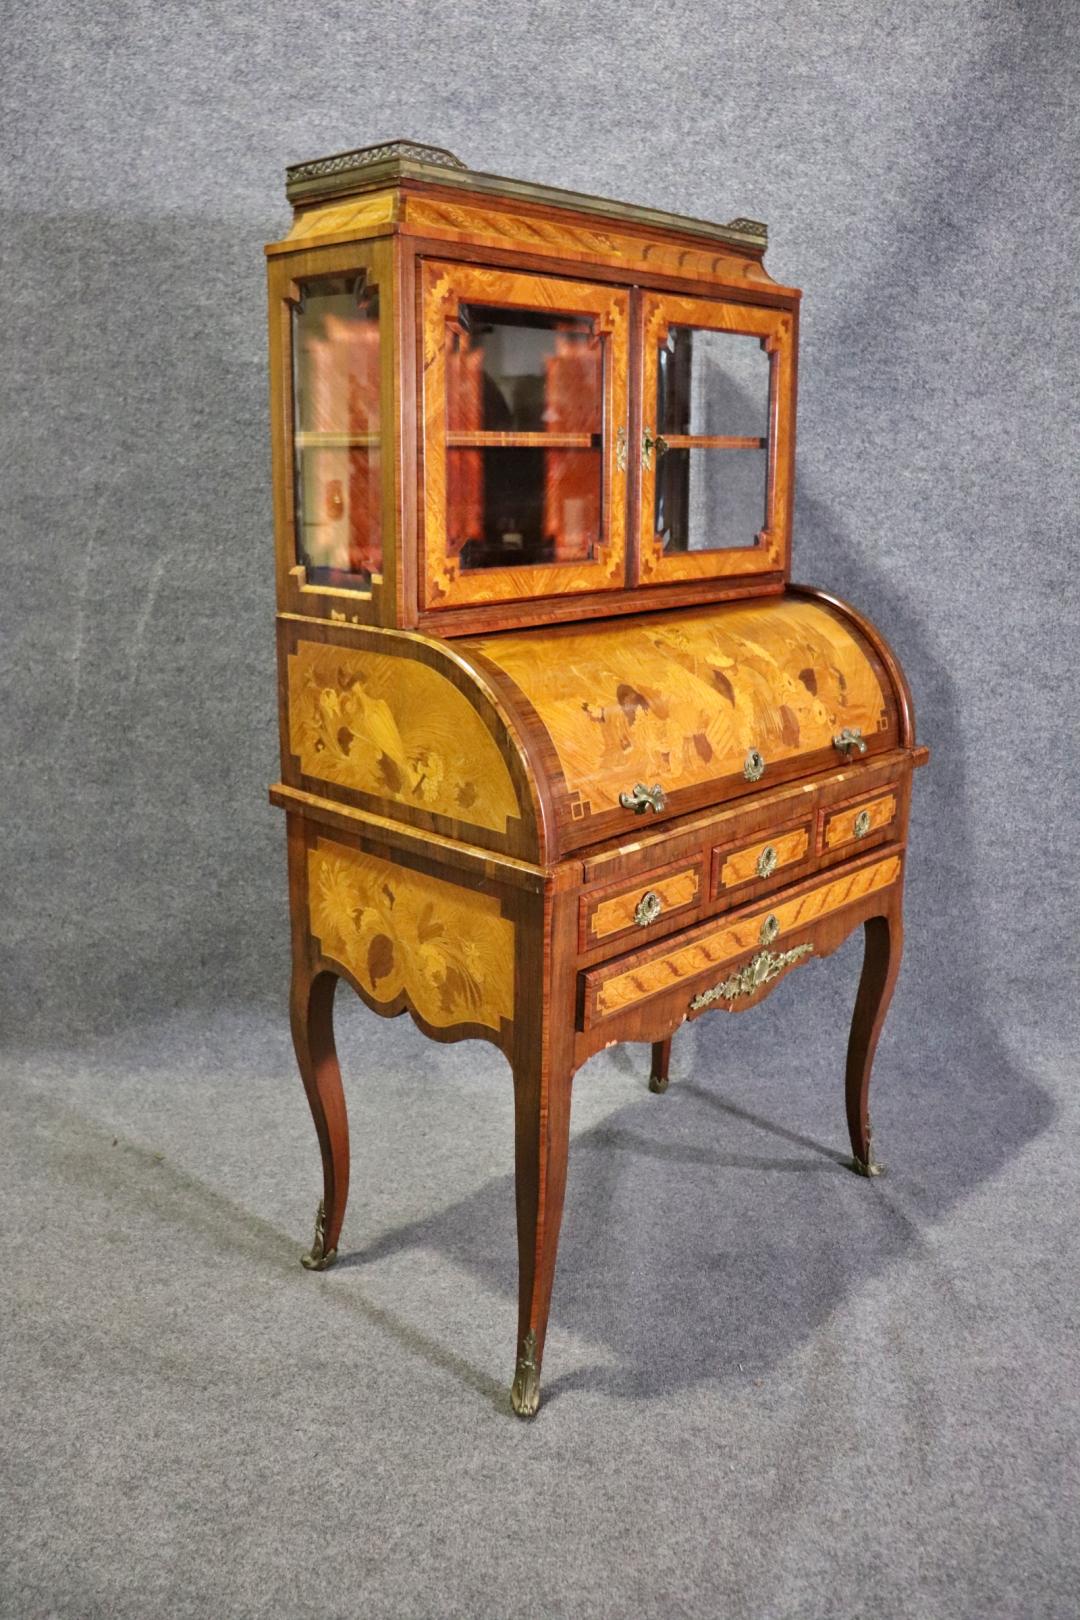 Early 20th Century Rosewood Circassian Walnut Inlaid Beveled Glass French Louis XV Secretary Desk For Sale